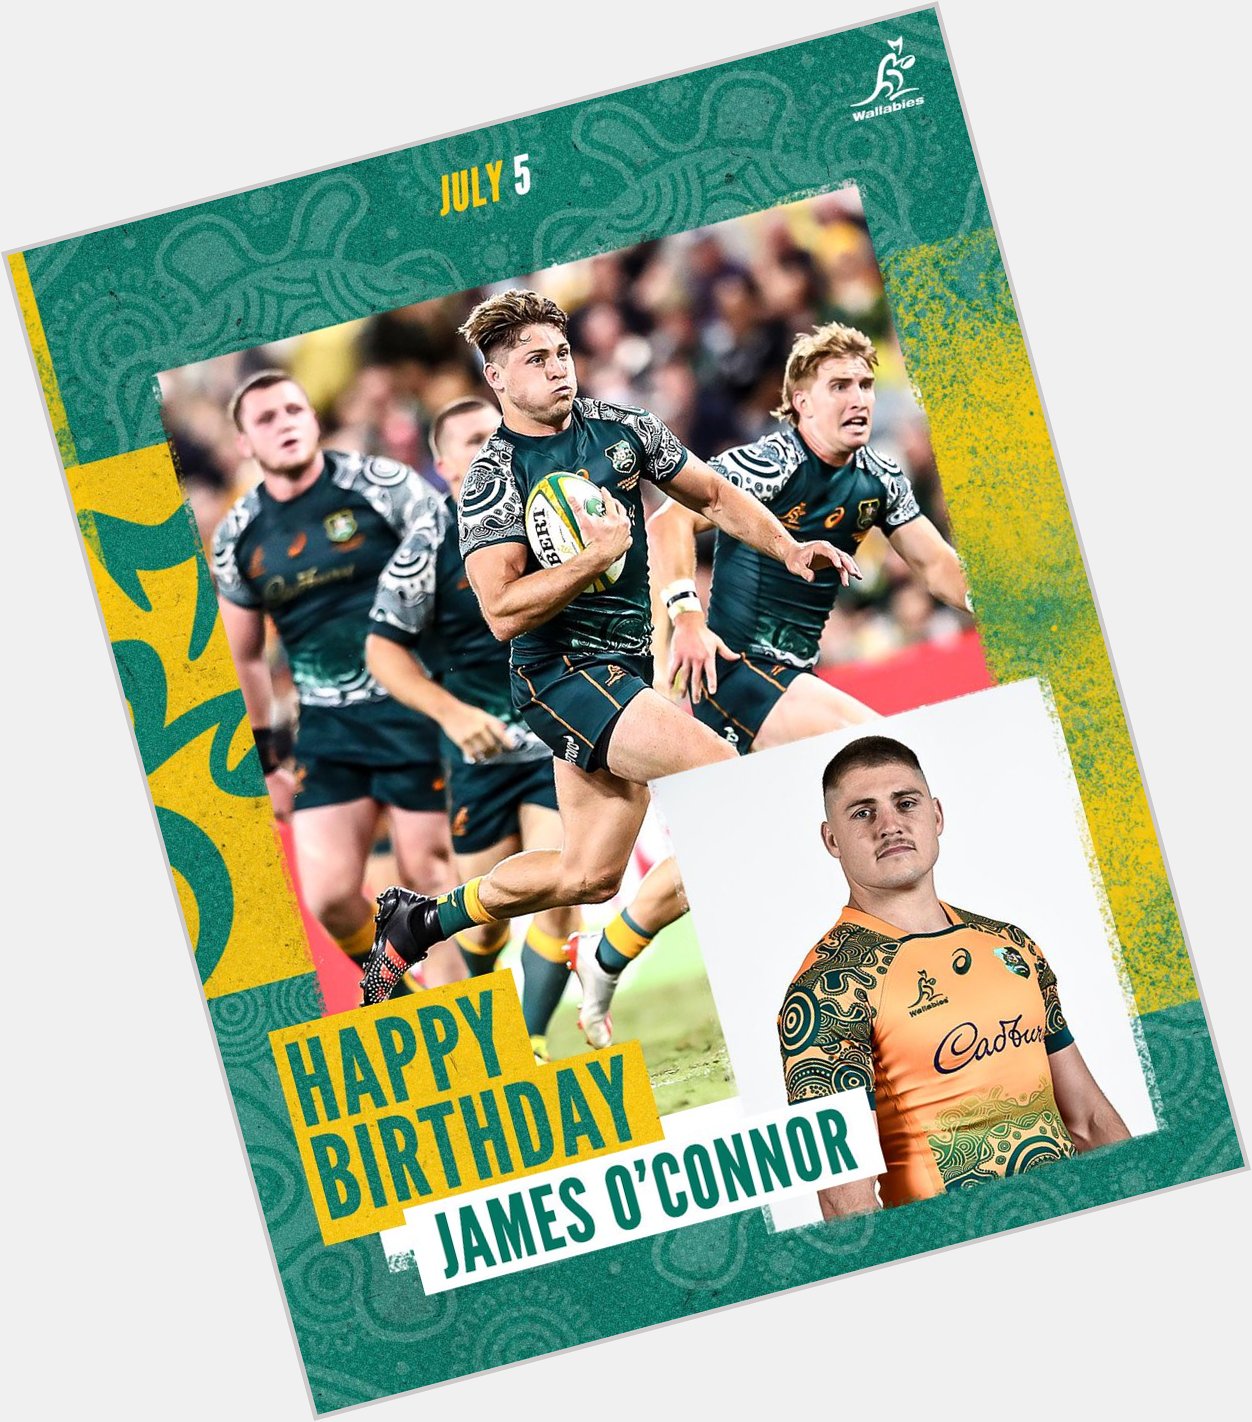  Wishing a Happy Birthday to our guys, James O Connor & Darcy Swain. 